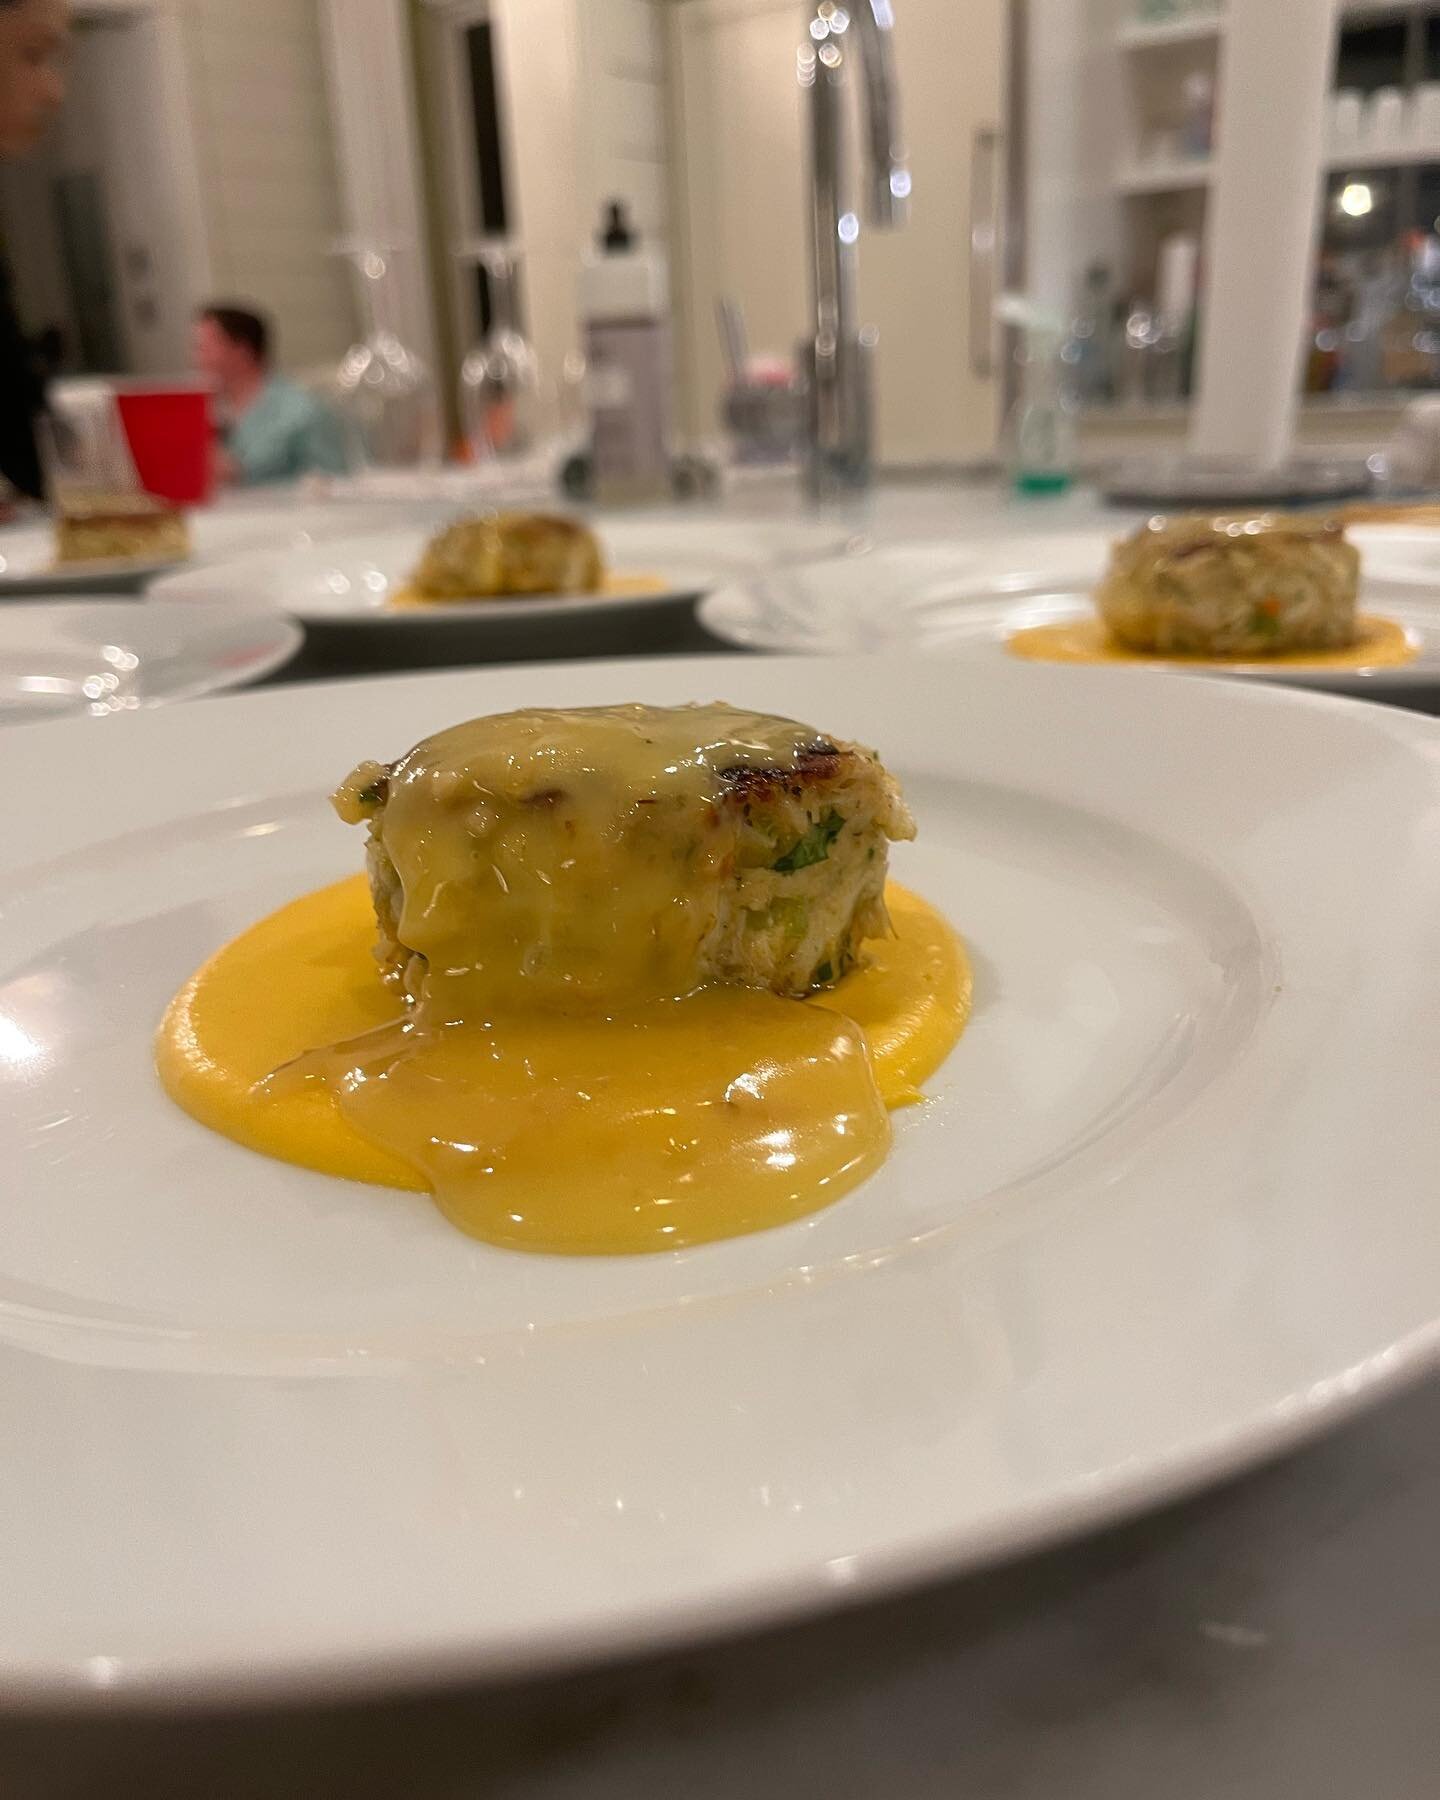 Life's too short not to be like @smderrett &amp; @derrettj1 and add @paramount_caviar to your prime  filet steak tartare. Potatoes au gratin served table side &amp; chef Nathan's signature crab cakes. Double the size of course 😎